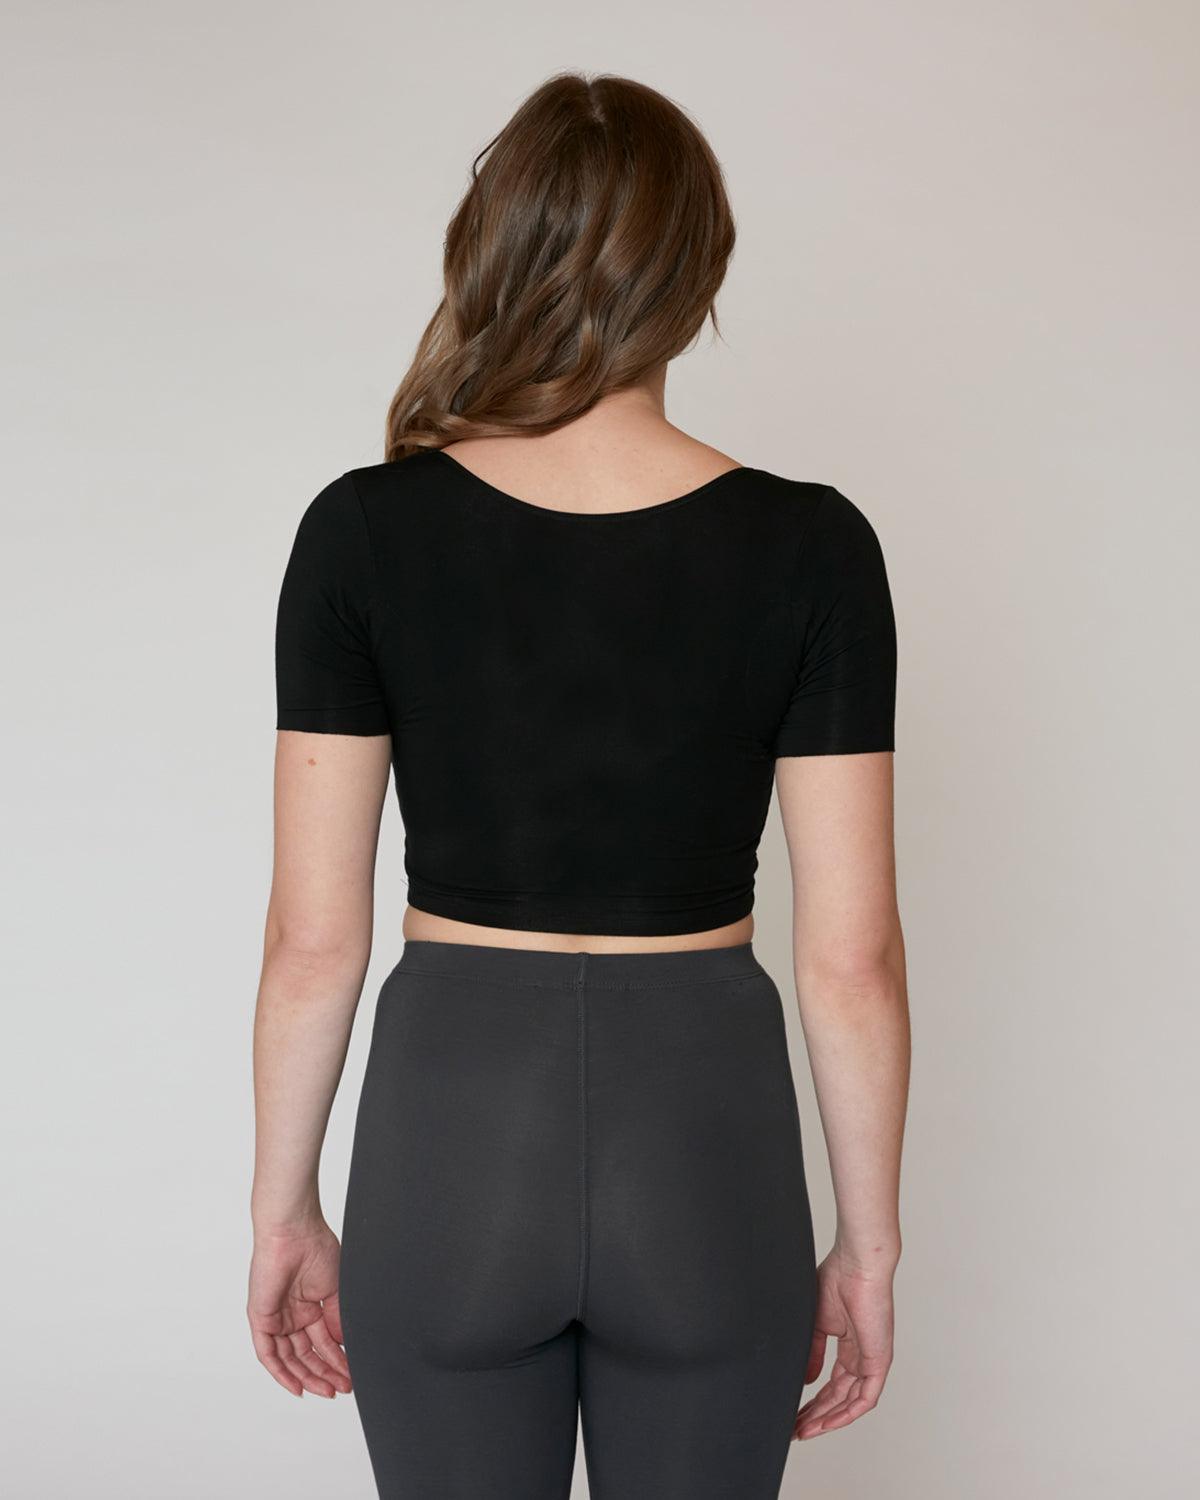 "#color_BLACK|Siobhan is 5'8.5" and wears a size S